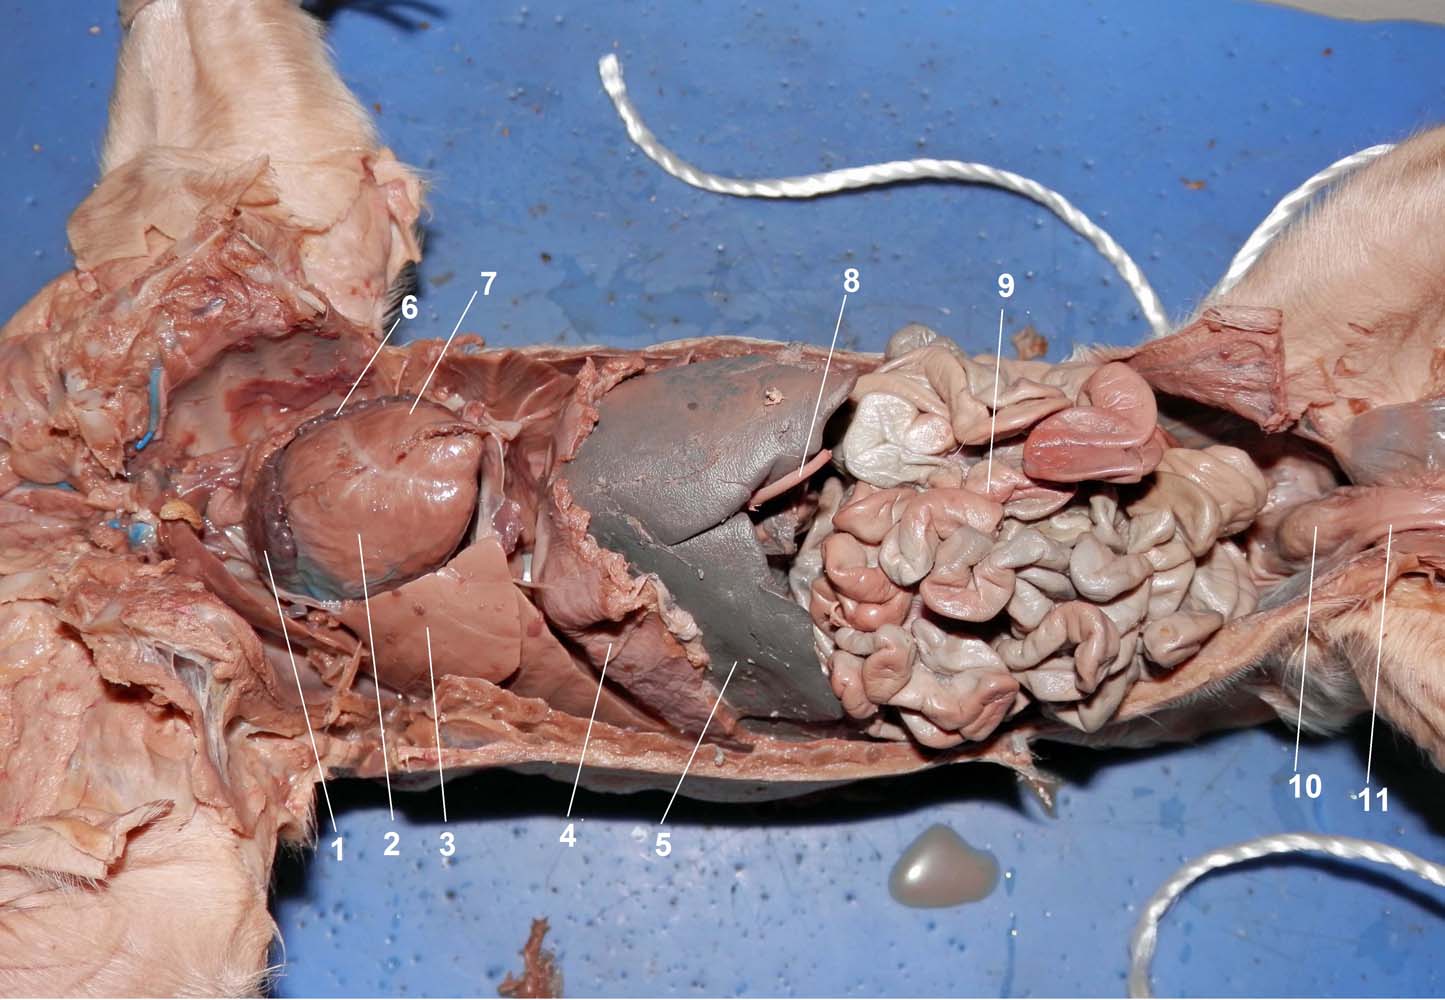 Dissected Thoracic and Abdominal Cavity